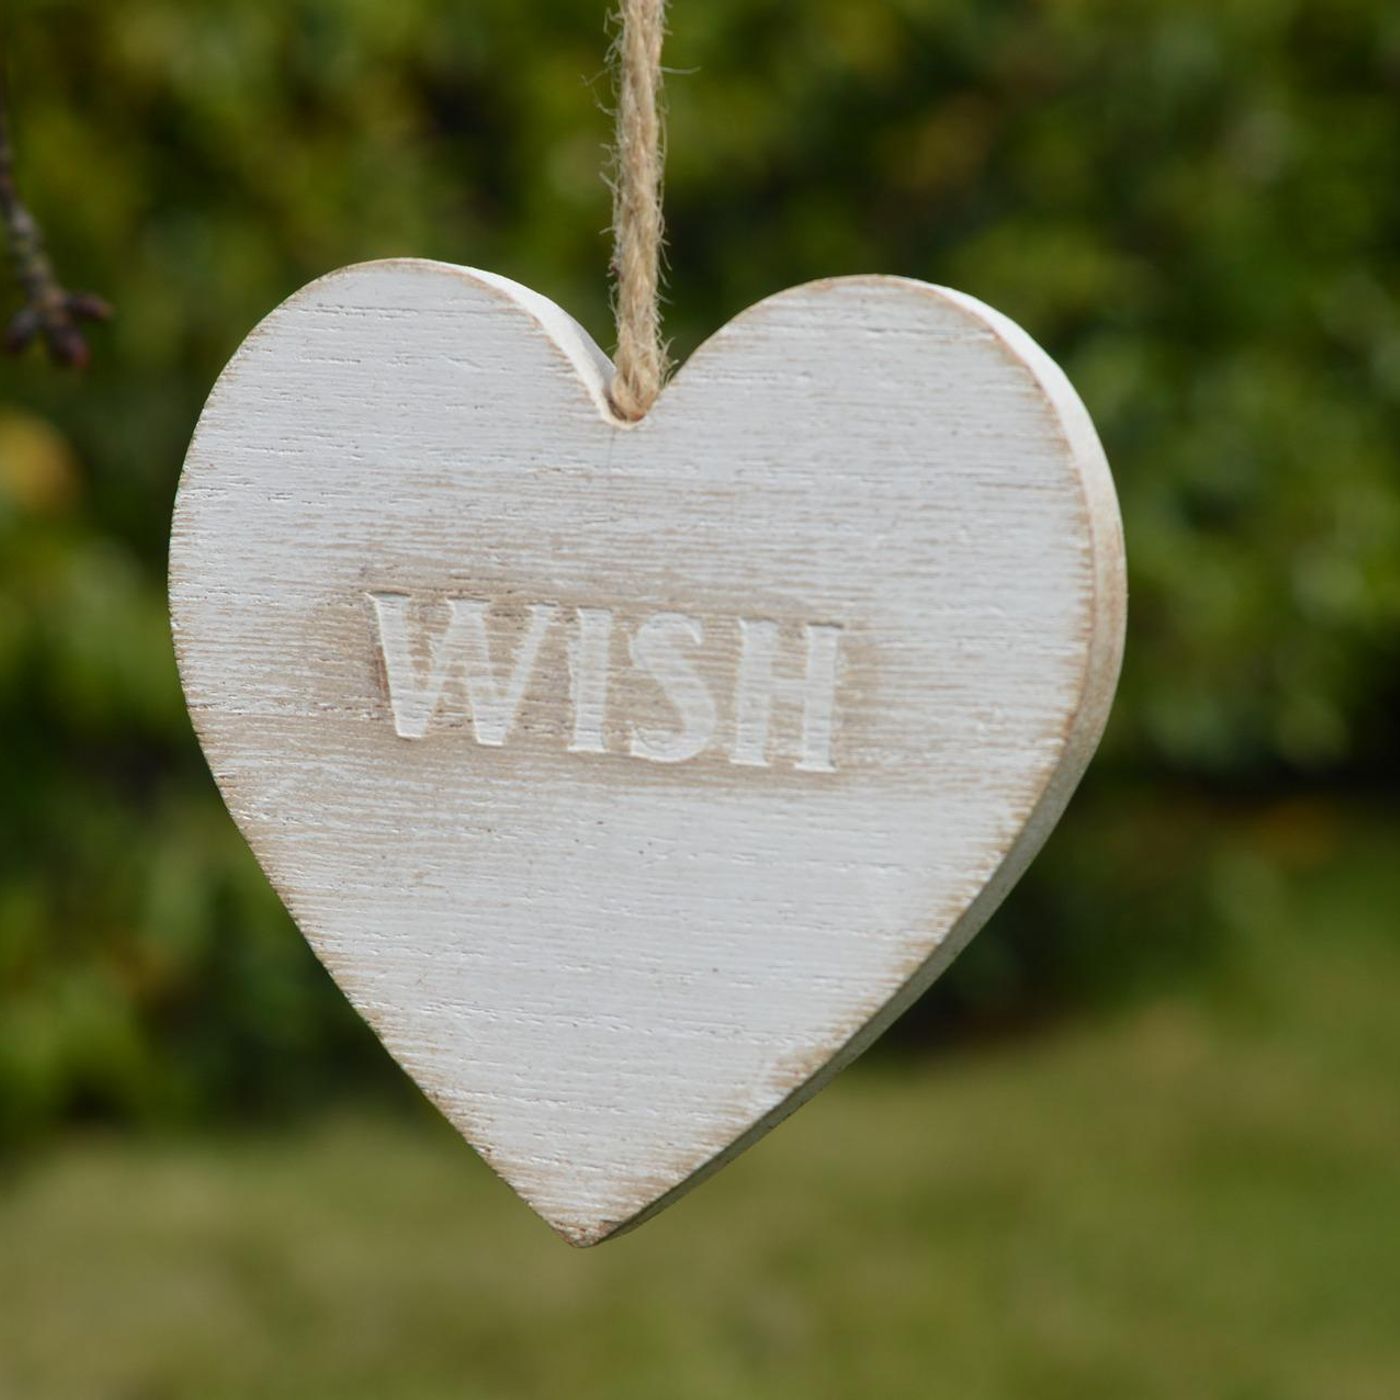 Episode 288 Love on a Wish